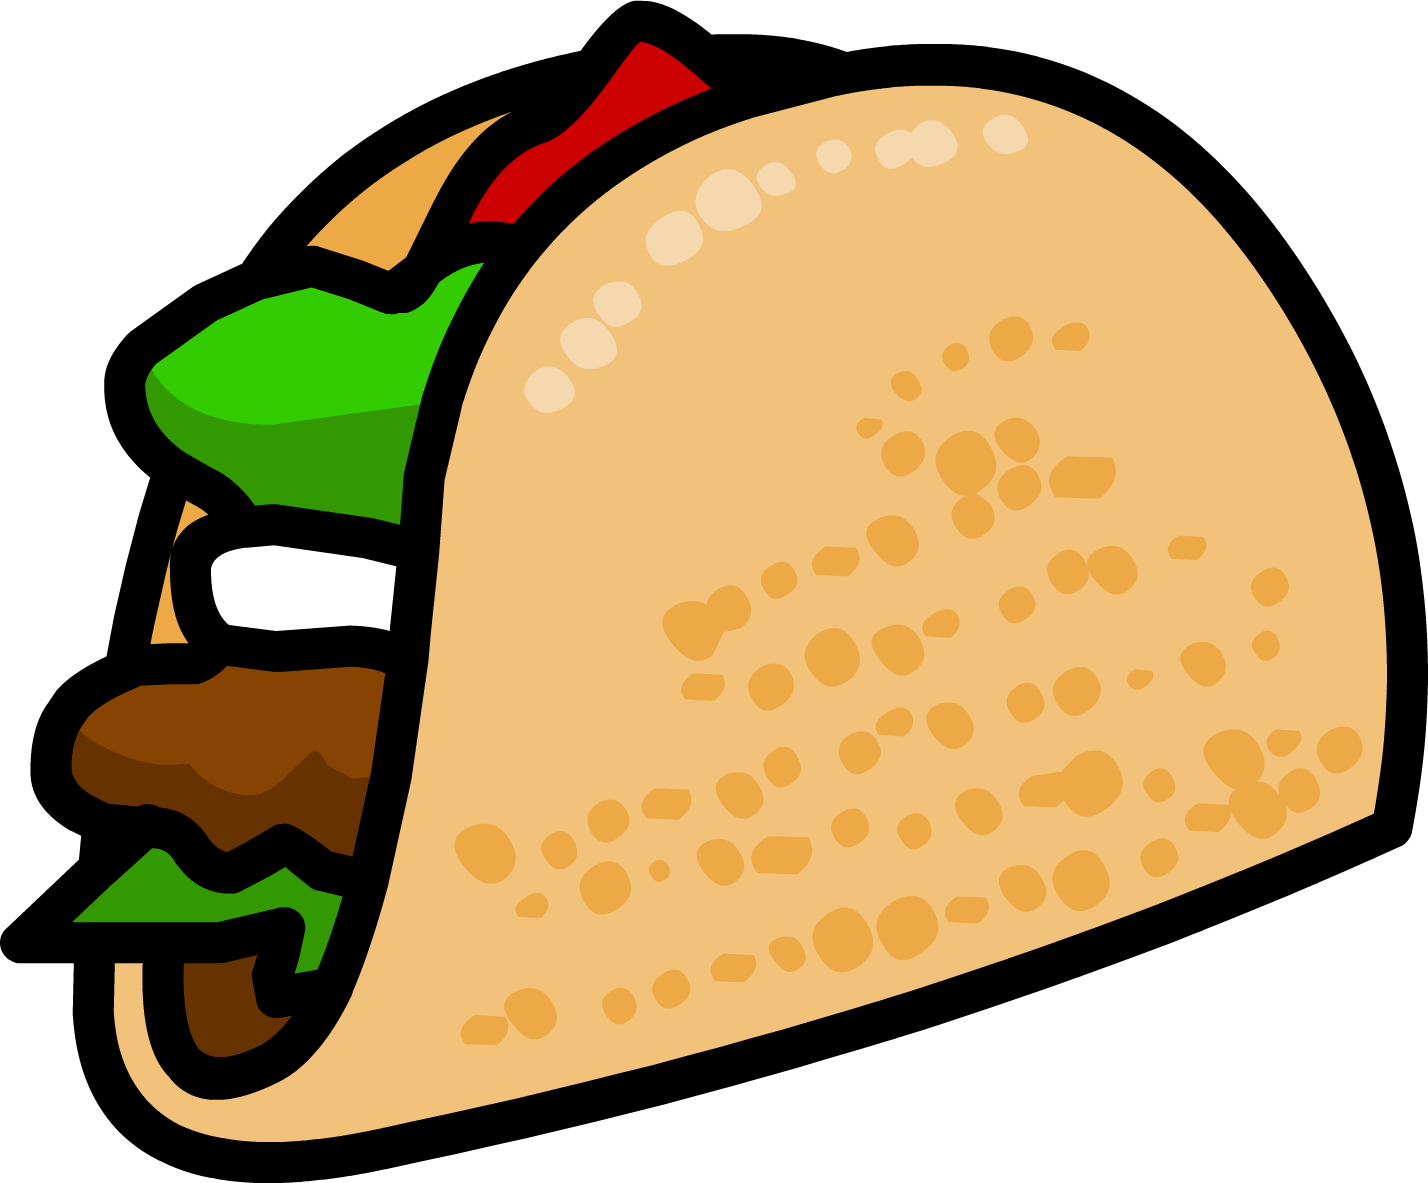 Taco Png - Polish your personal project or design with these taco